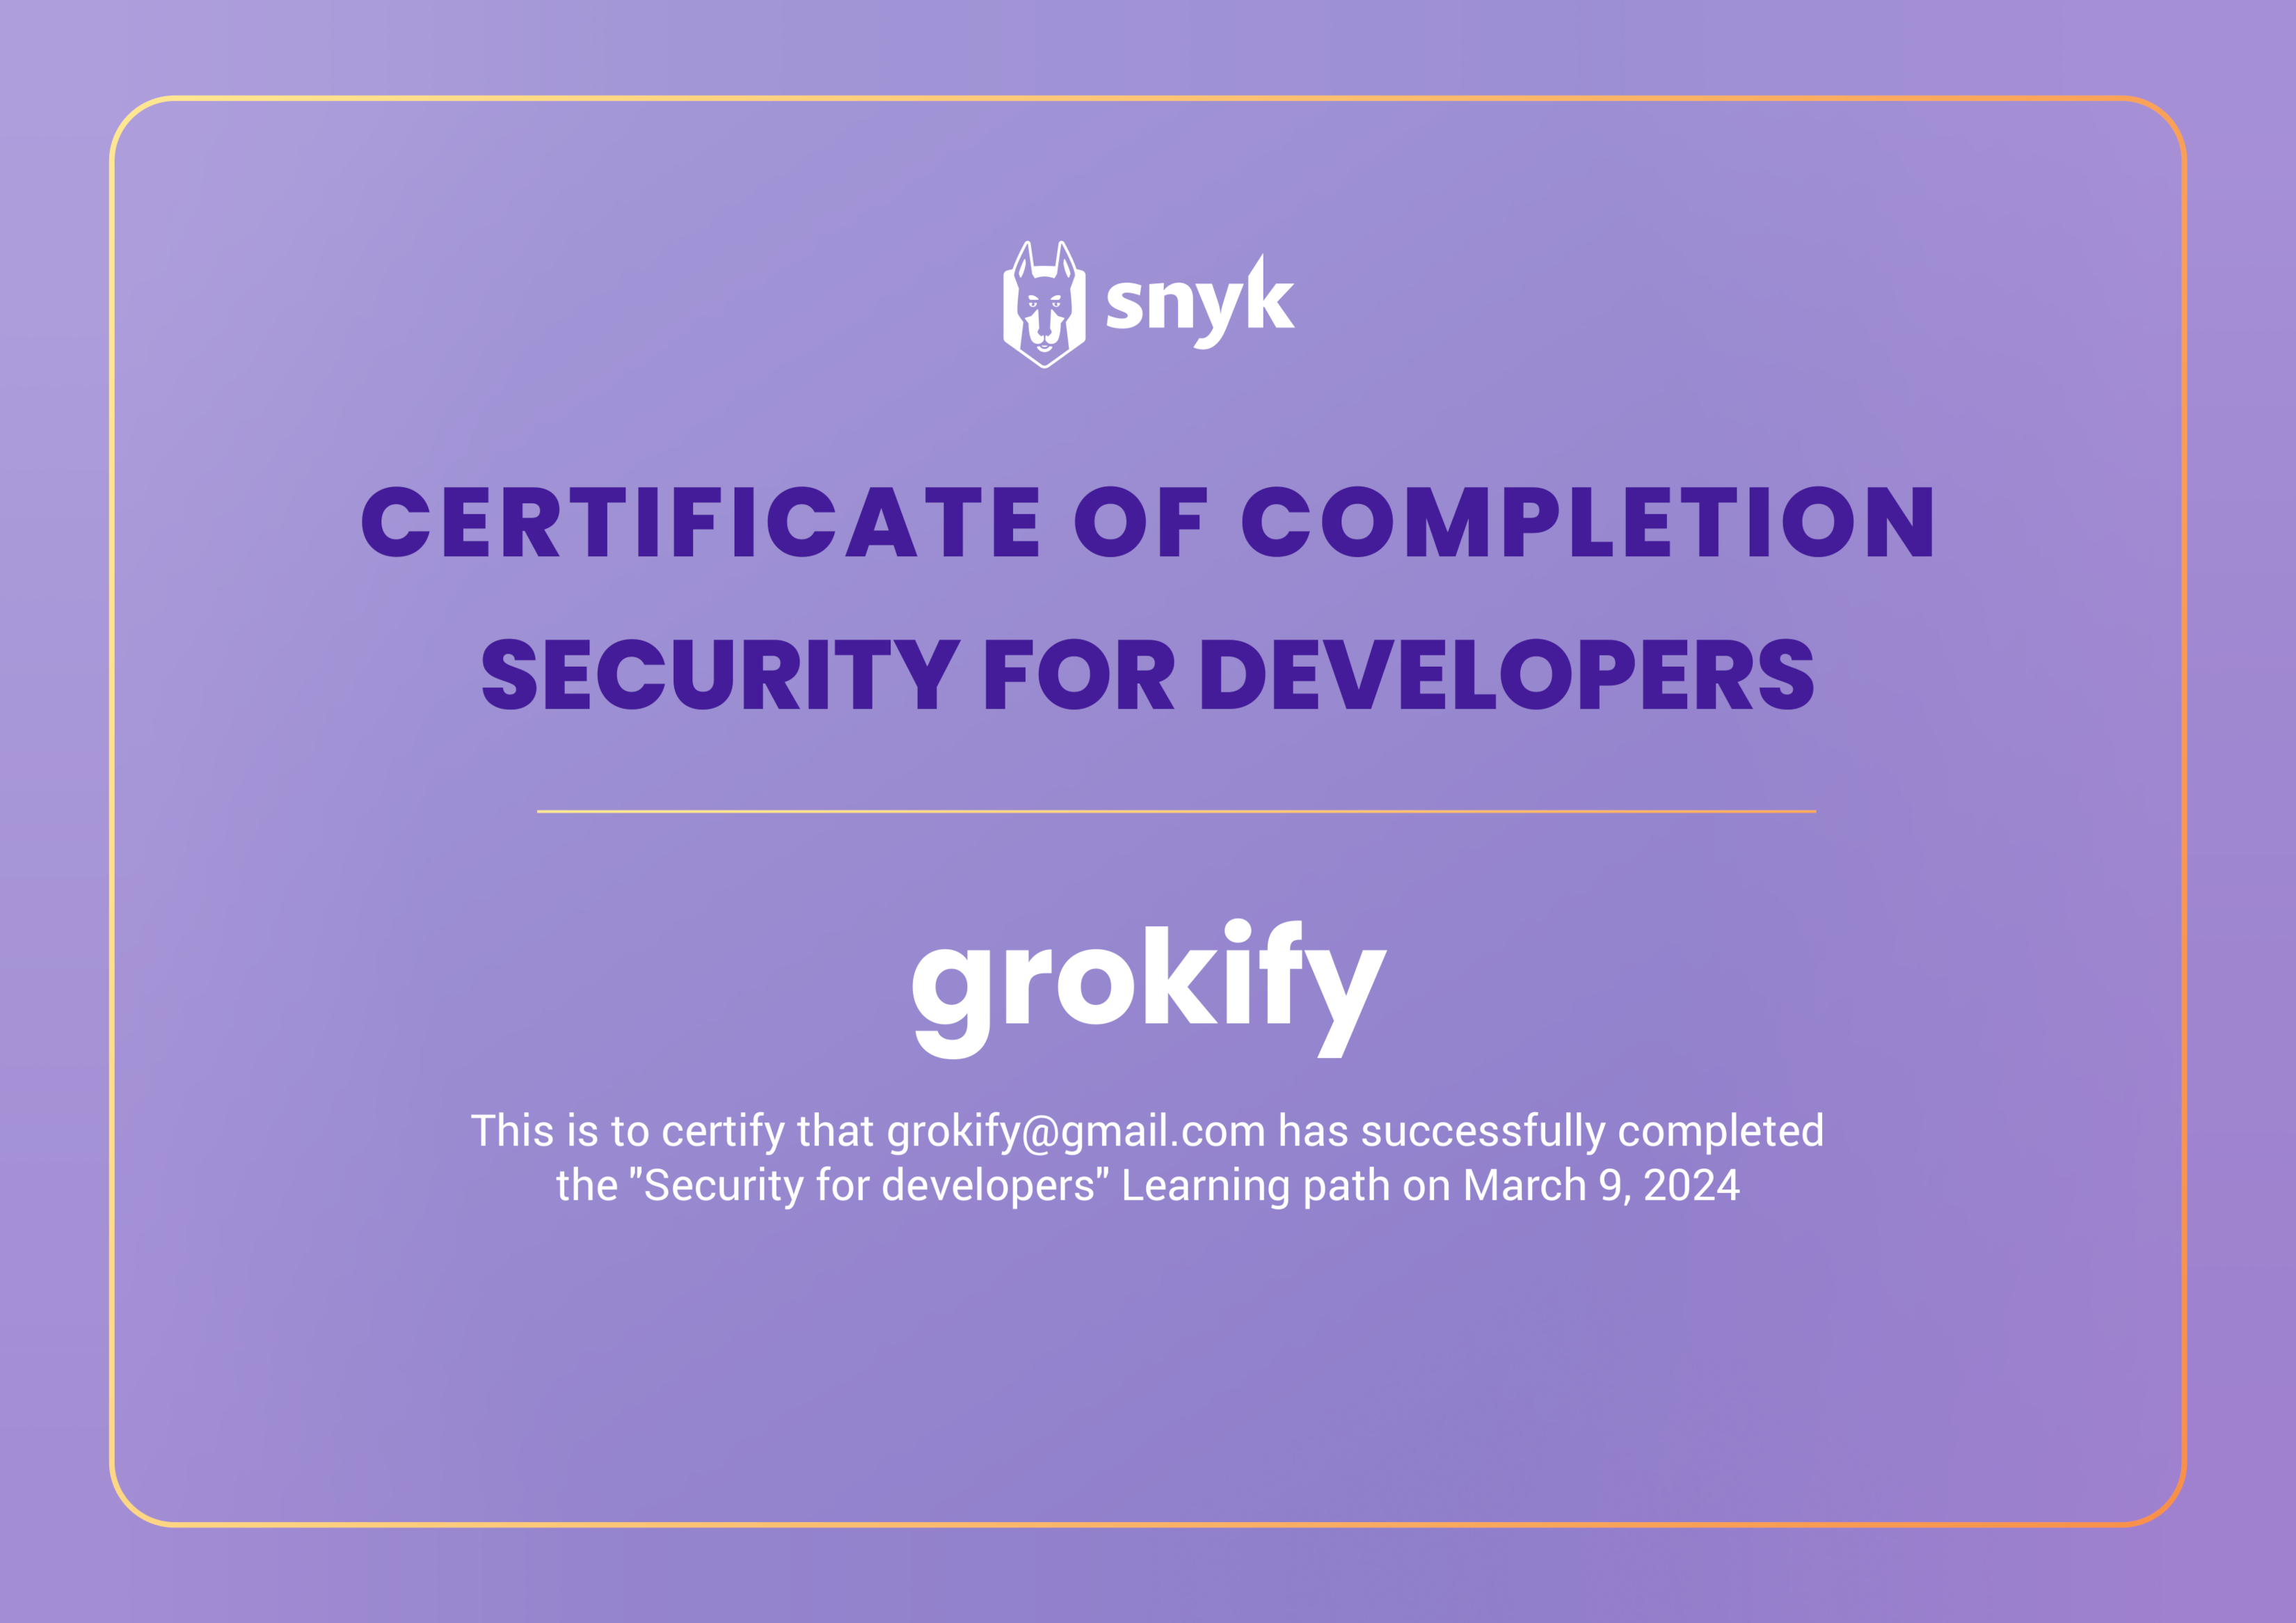 John's Security for Developers from Snyk